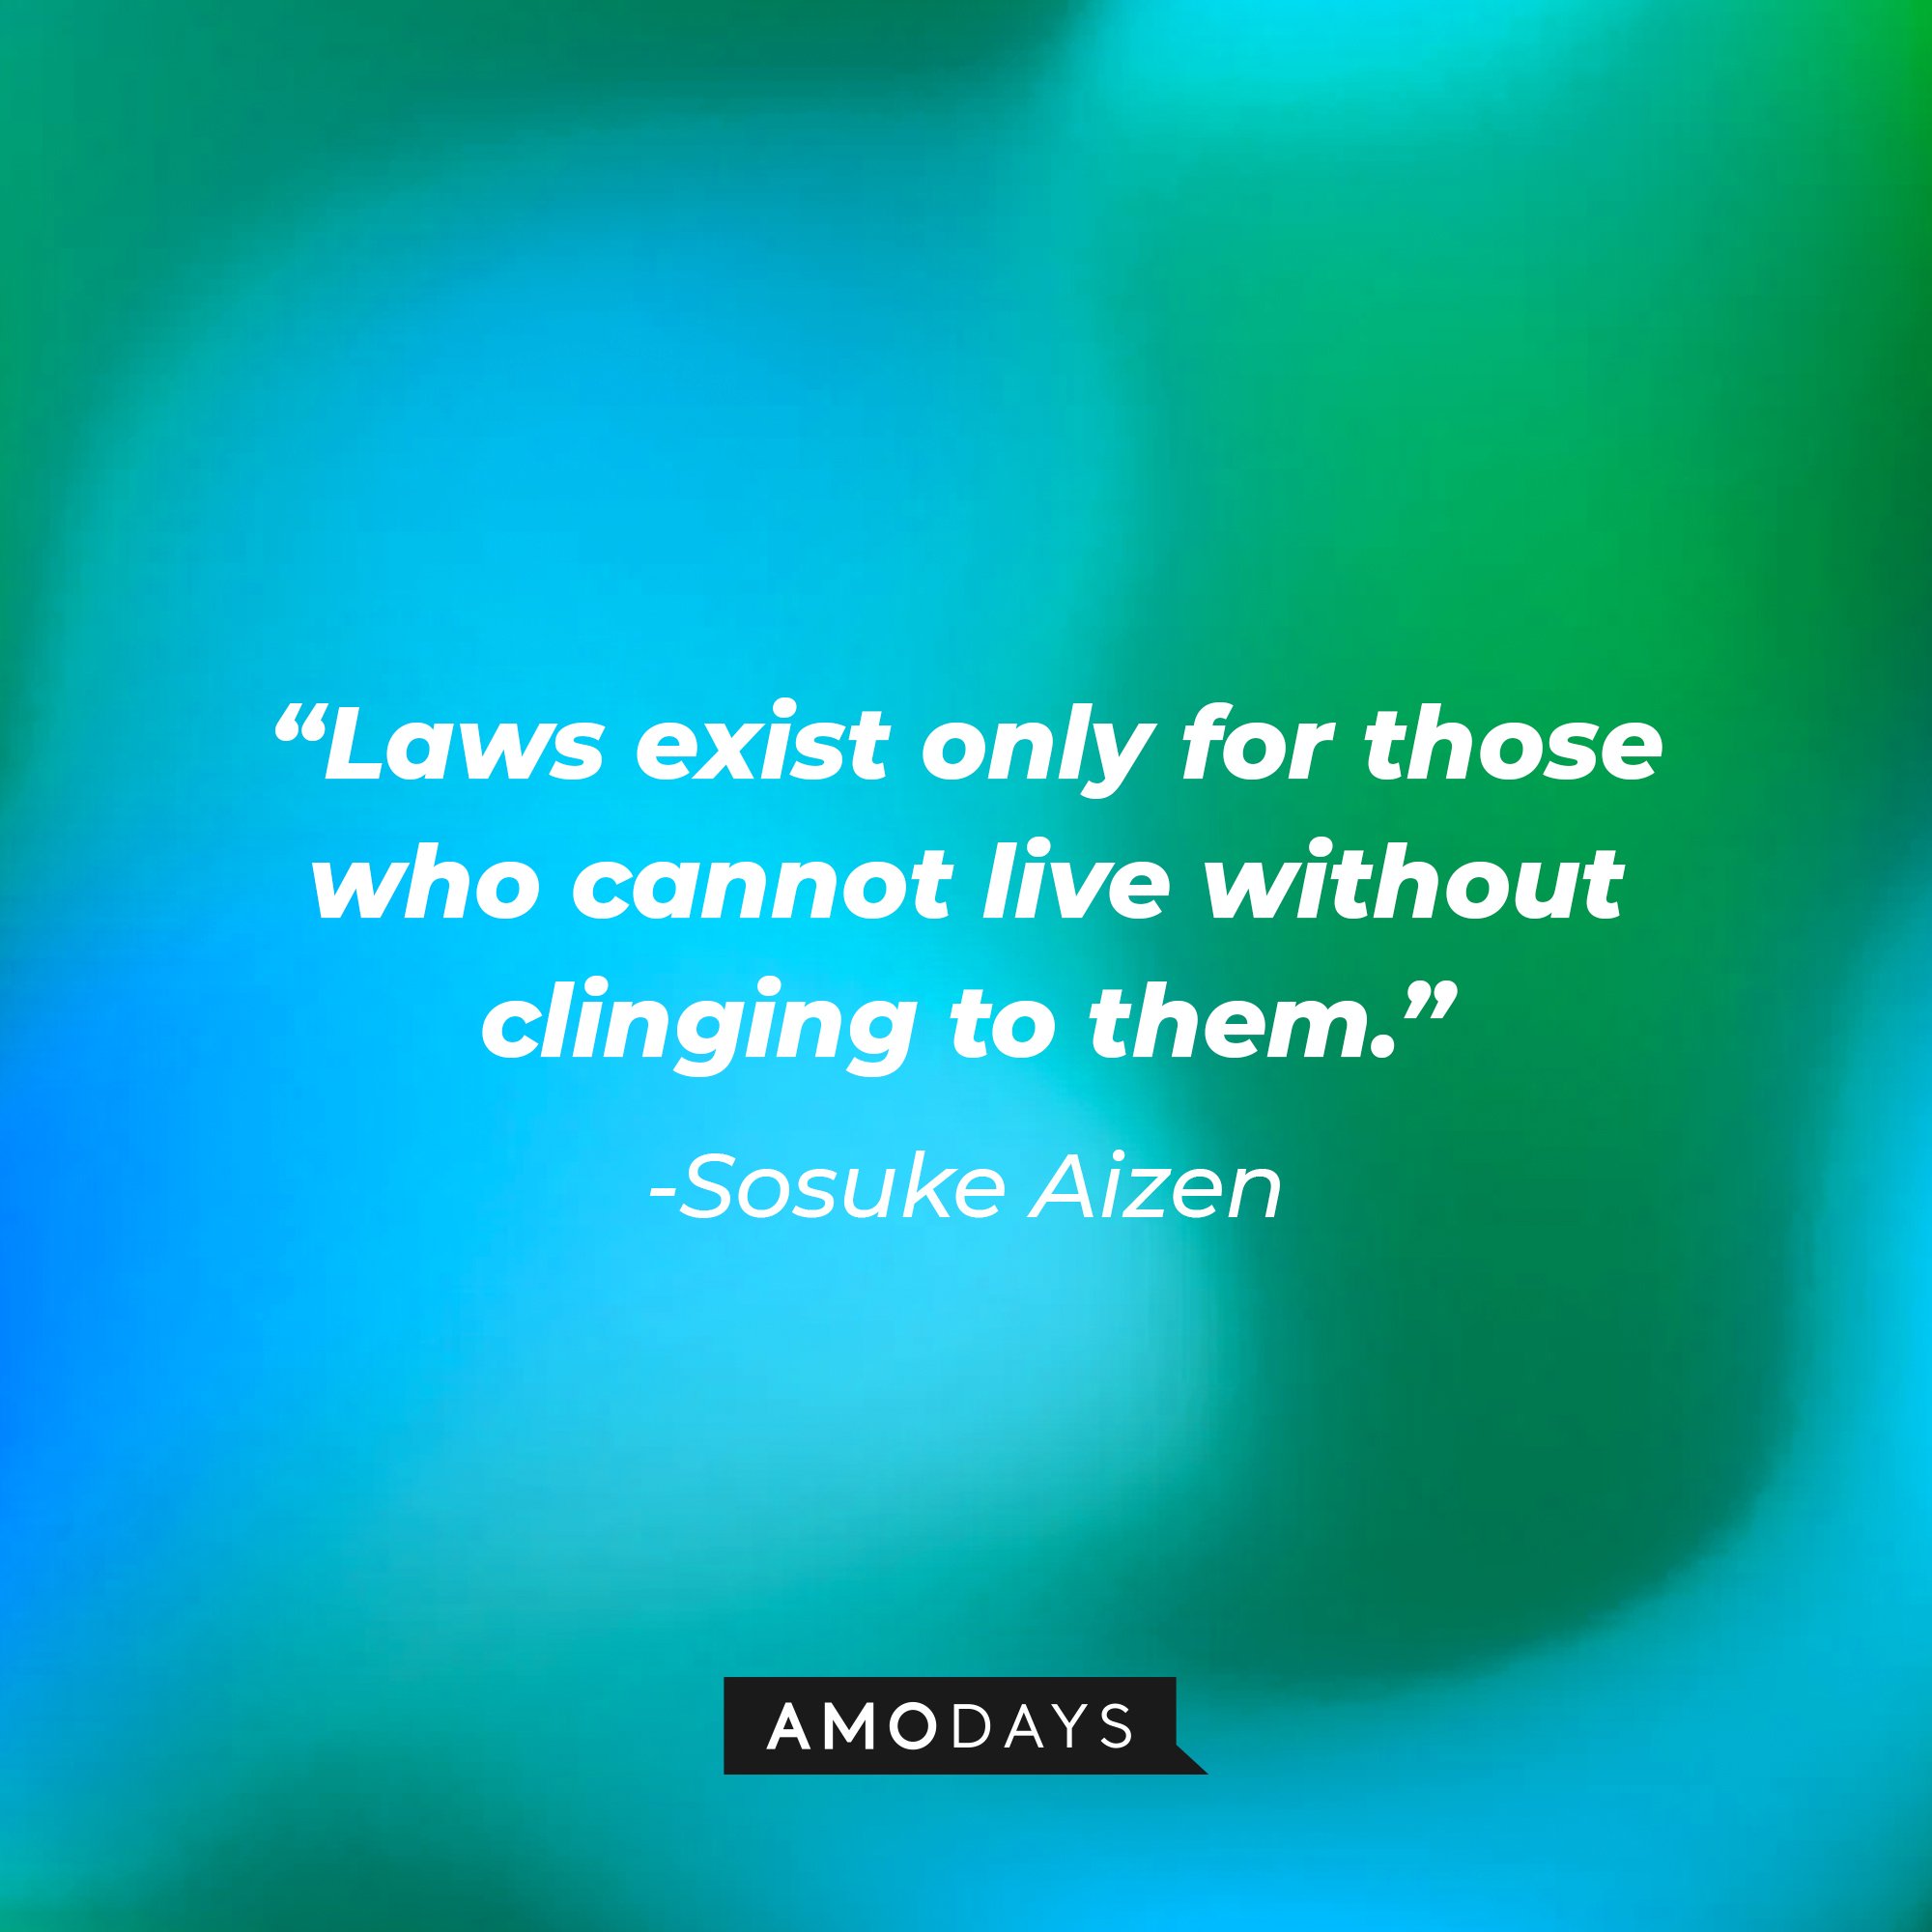 Sosuke Aizen's quote: "Laws exist only for those who cannot live without clinging to them." | Image: AmoDays